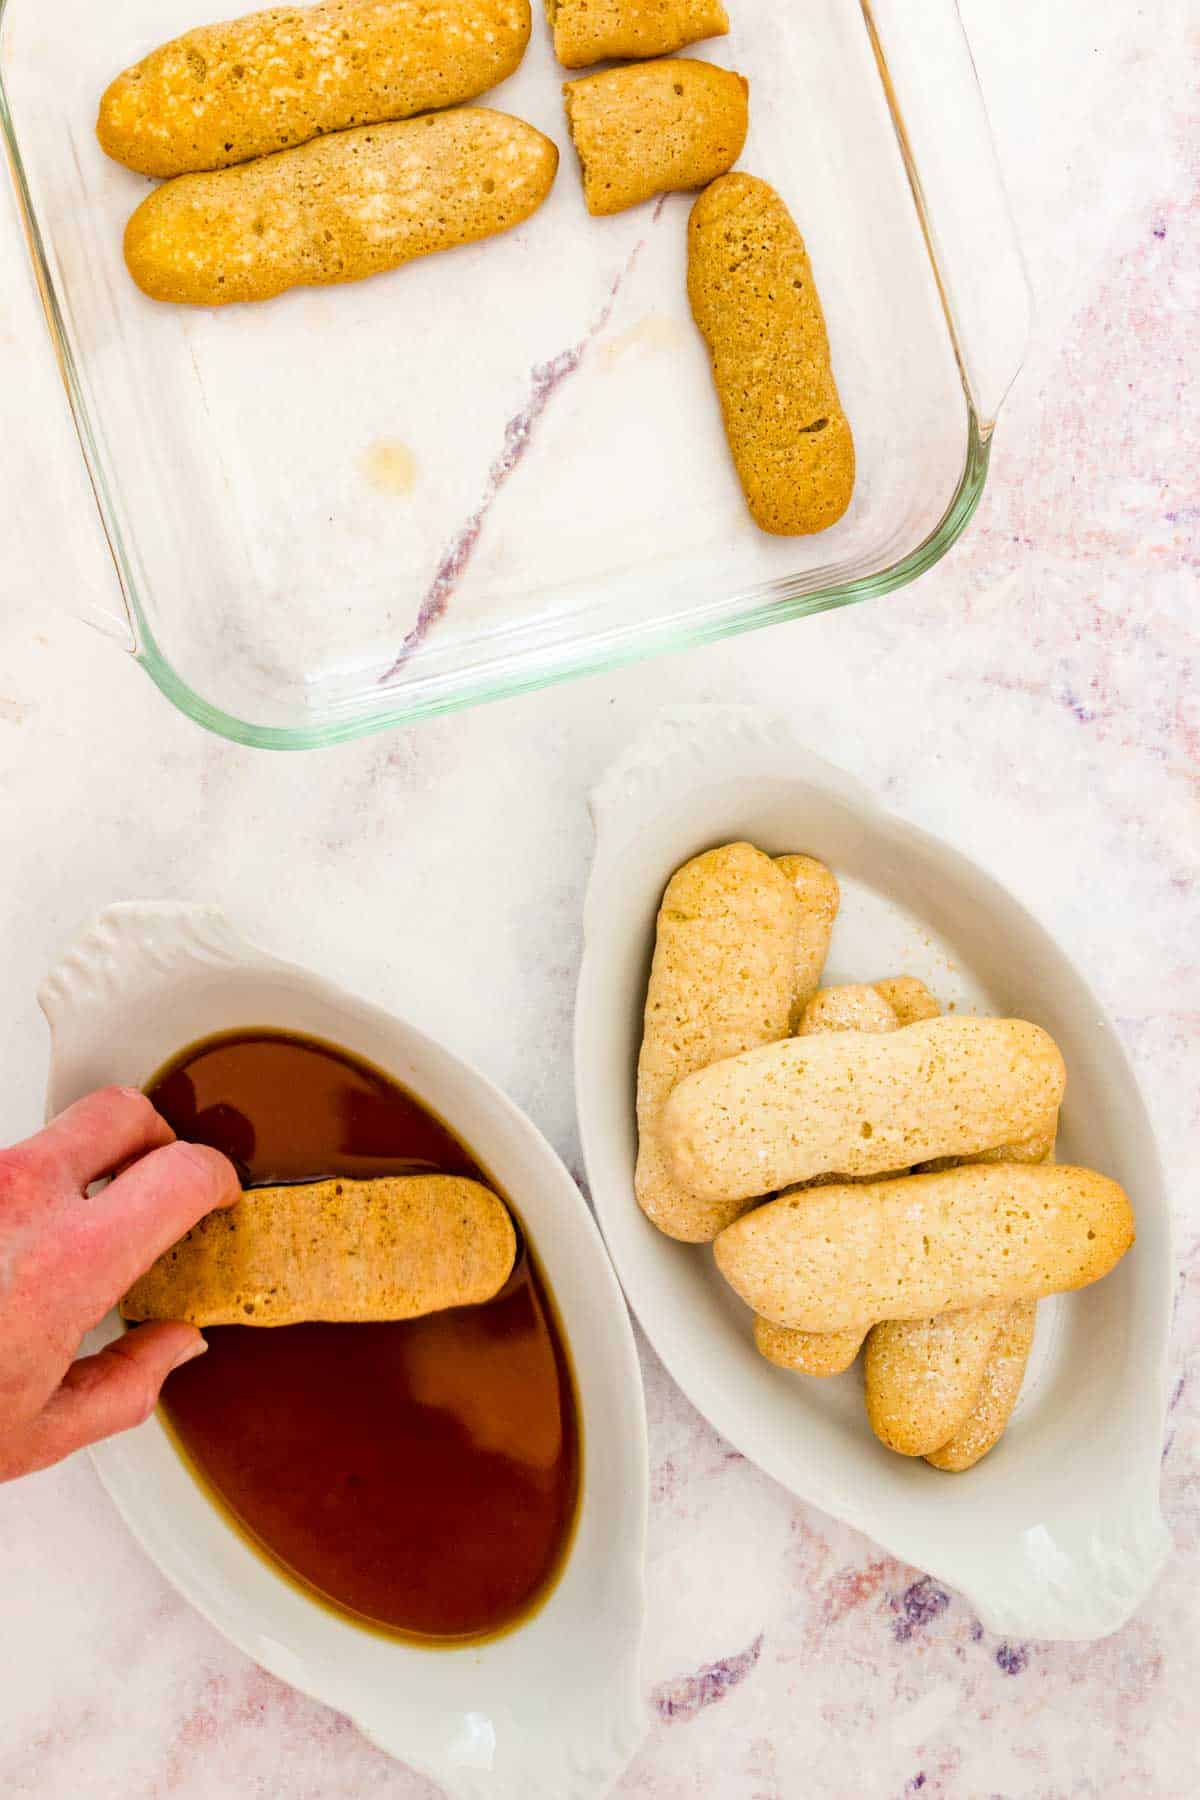 A hand dips a gluten-free ladyfinger into a mixture of espresso and rum, next to a bowl of ladyfingers and a baking dish with dipped ladyfingers.